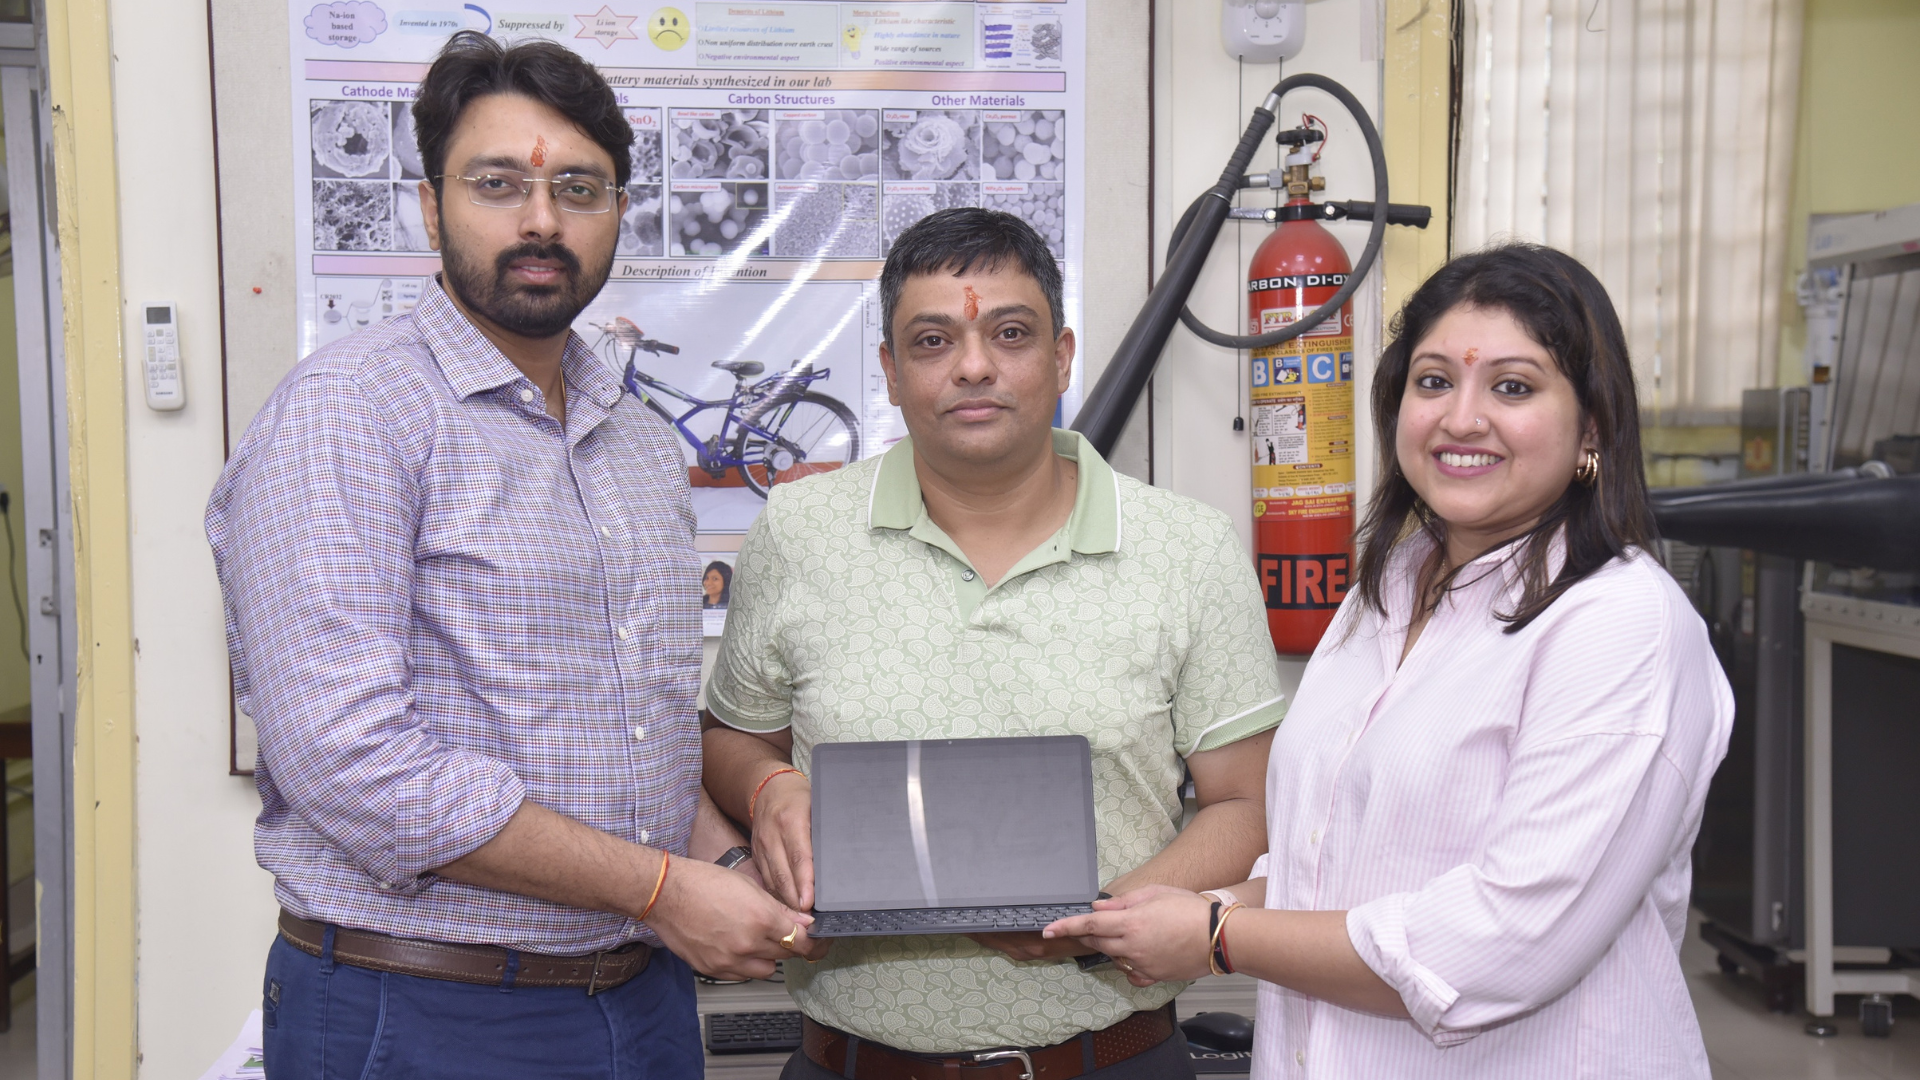 https://e-vehicleinfo.com/universe-mobility-collaborate-with-iit-kharagpur-to-develop-sodium-ion-battery/